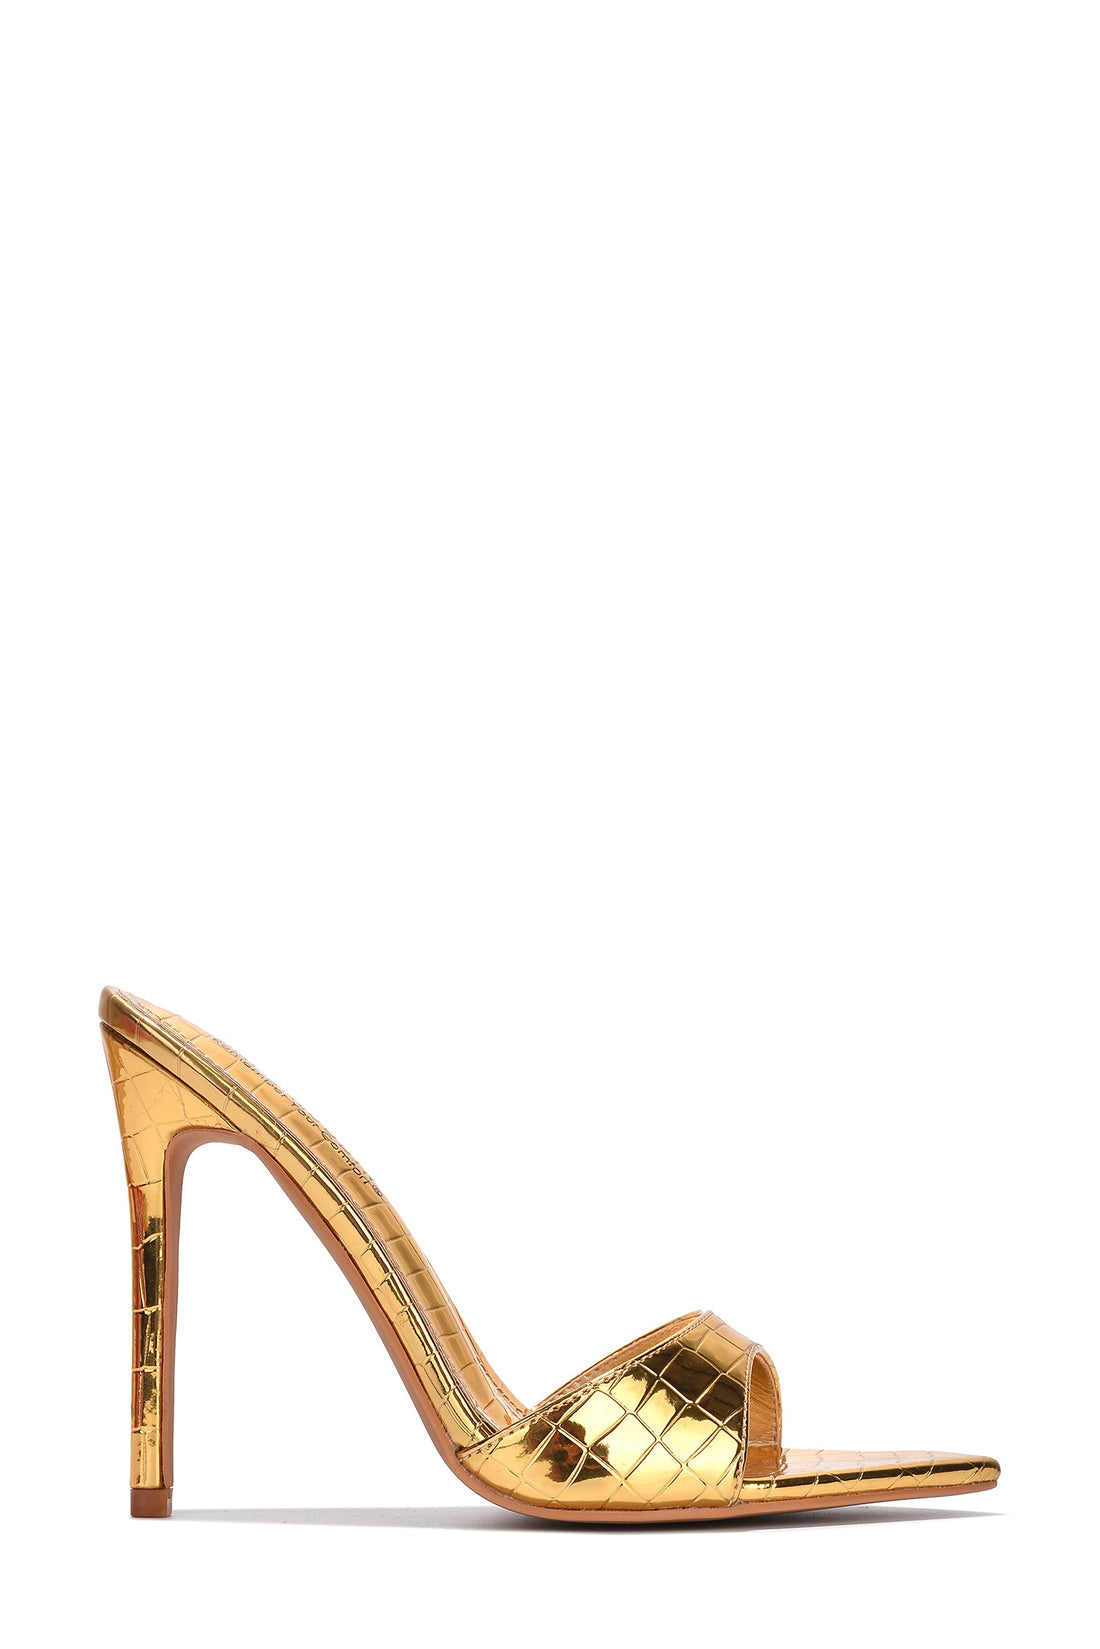 Barely There Pointed Toe Stiletto Heel Mule Sandals